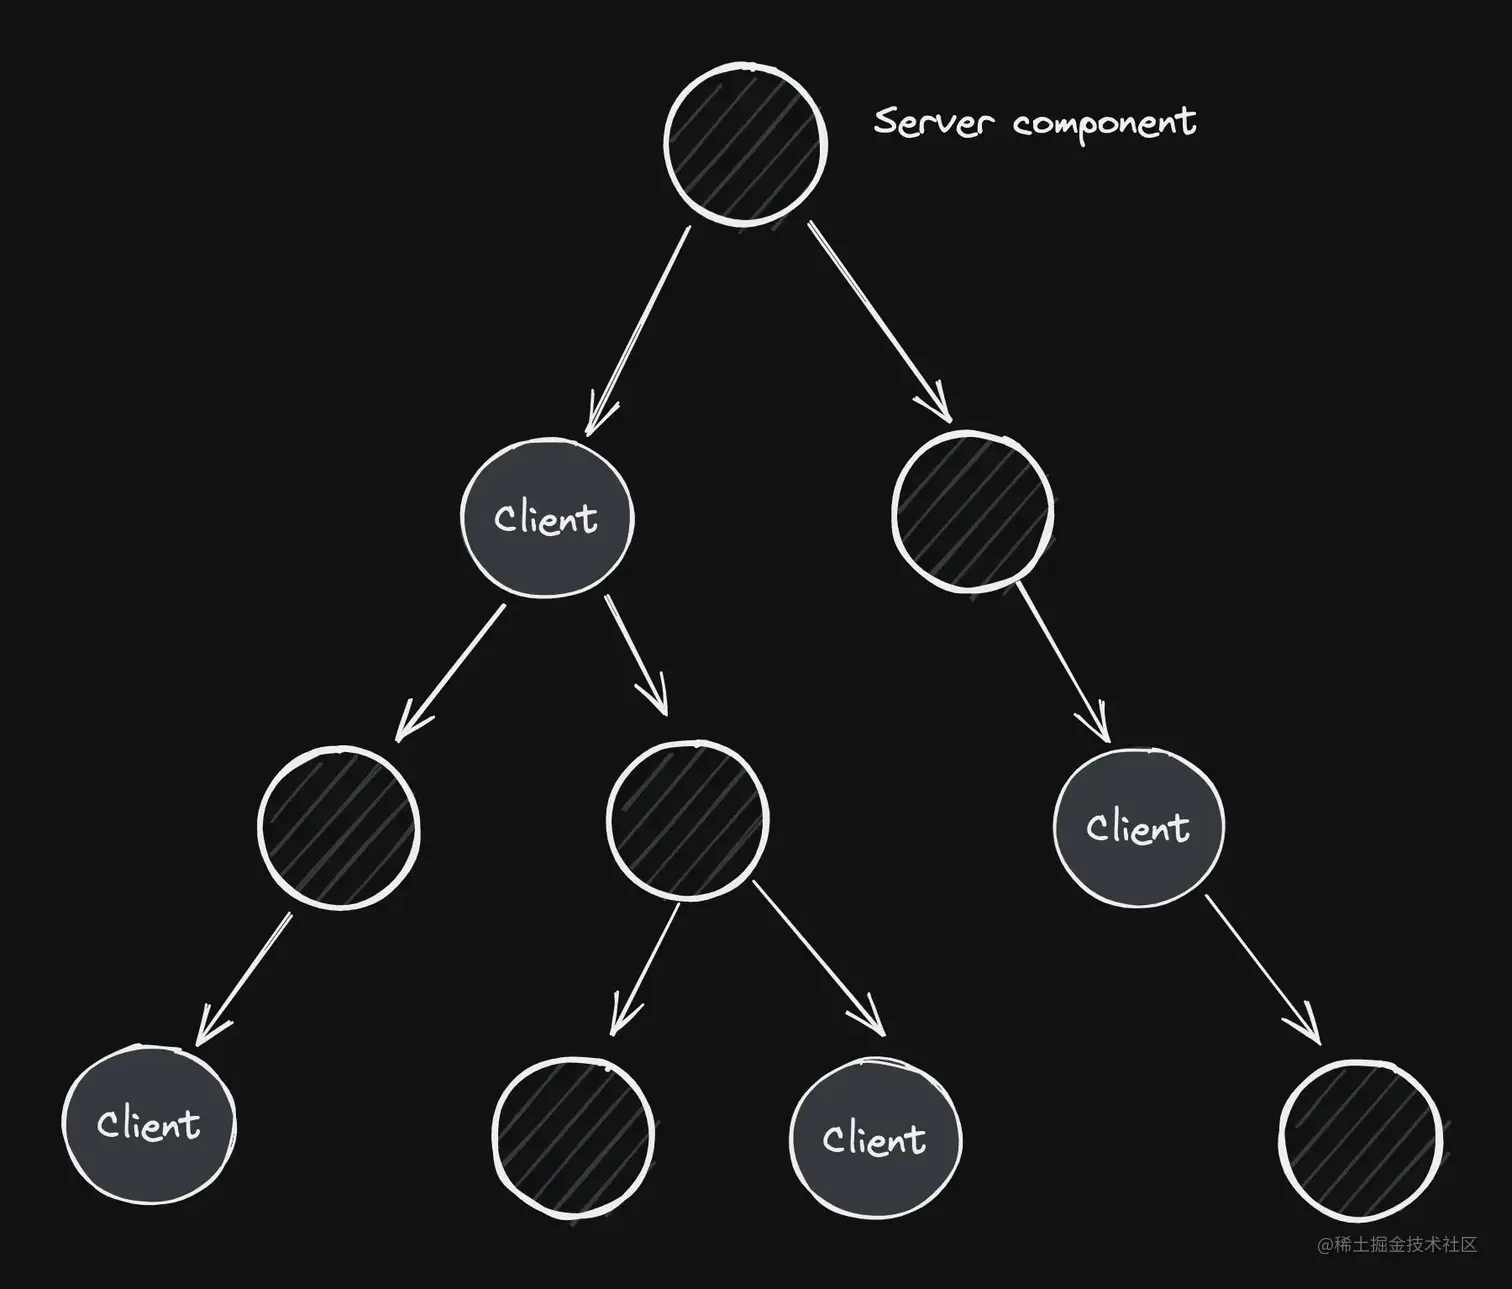 Diagram showing a React tree mixed with server and client components composed together